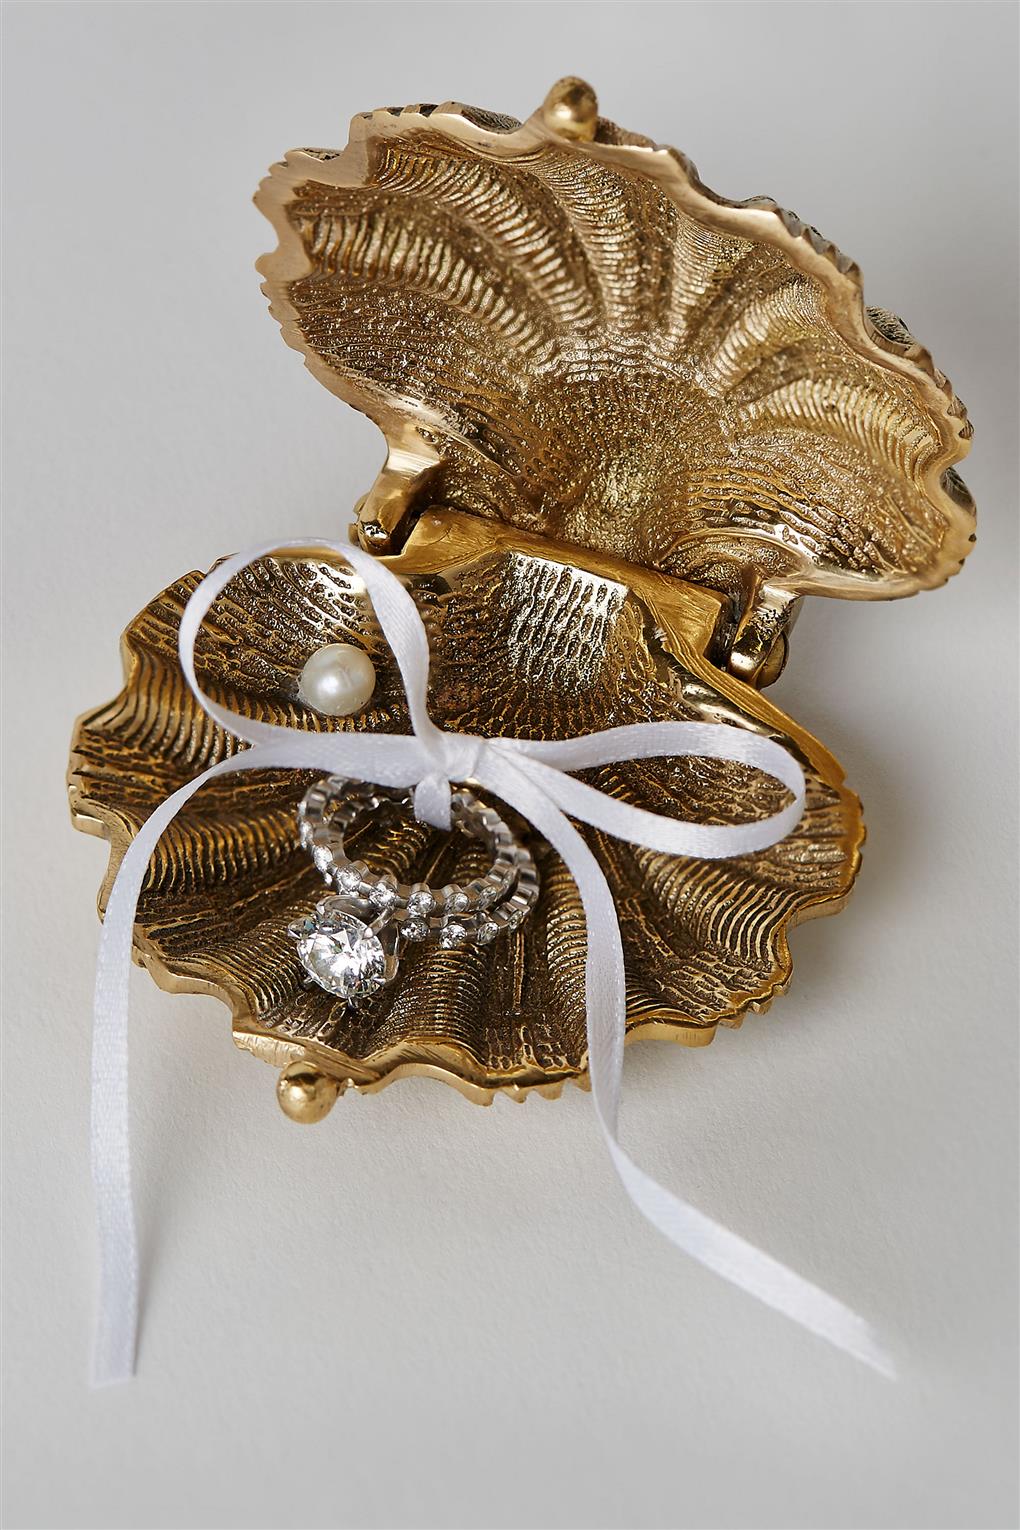 Gilded Seashell Ring Holder from BHLDN's Spring 2015 Collection